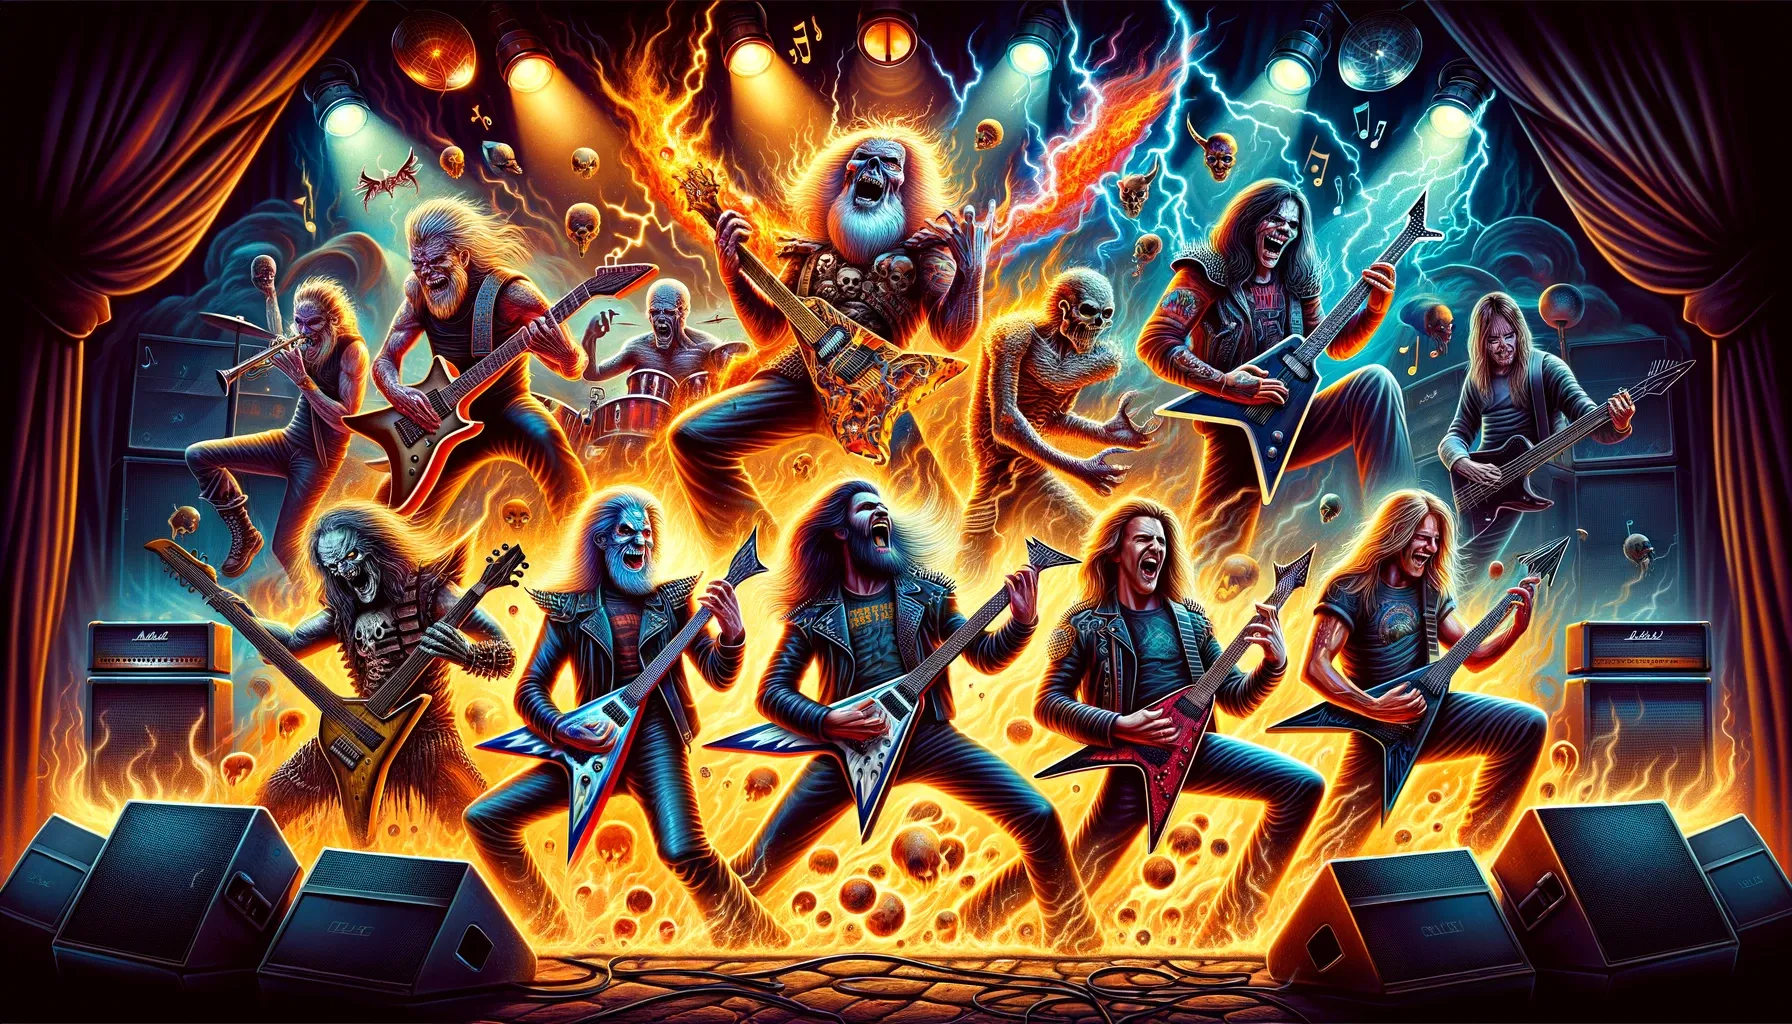 Heavy Metal Best Guitarists Of All Time: Everyone Needs it